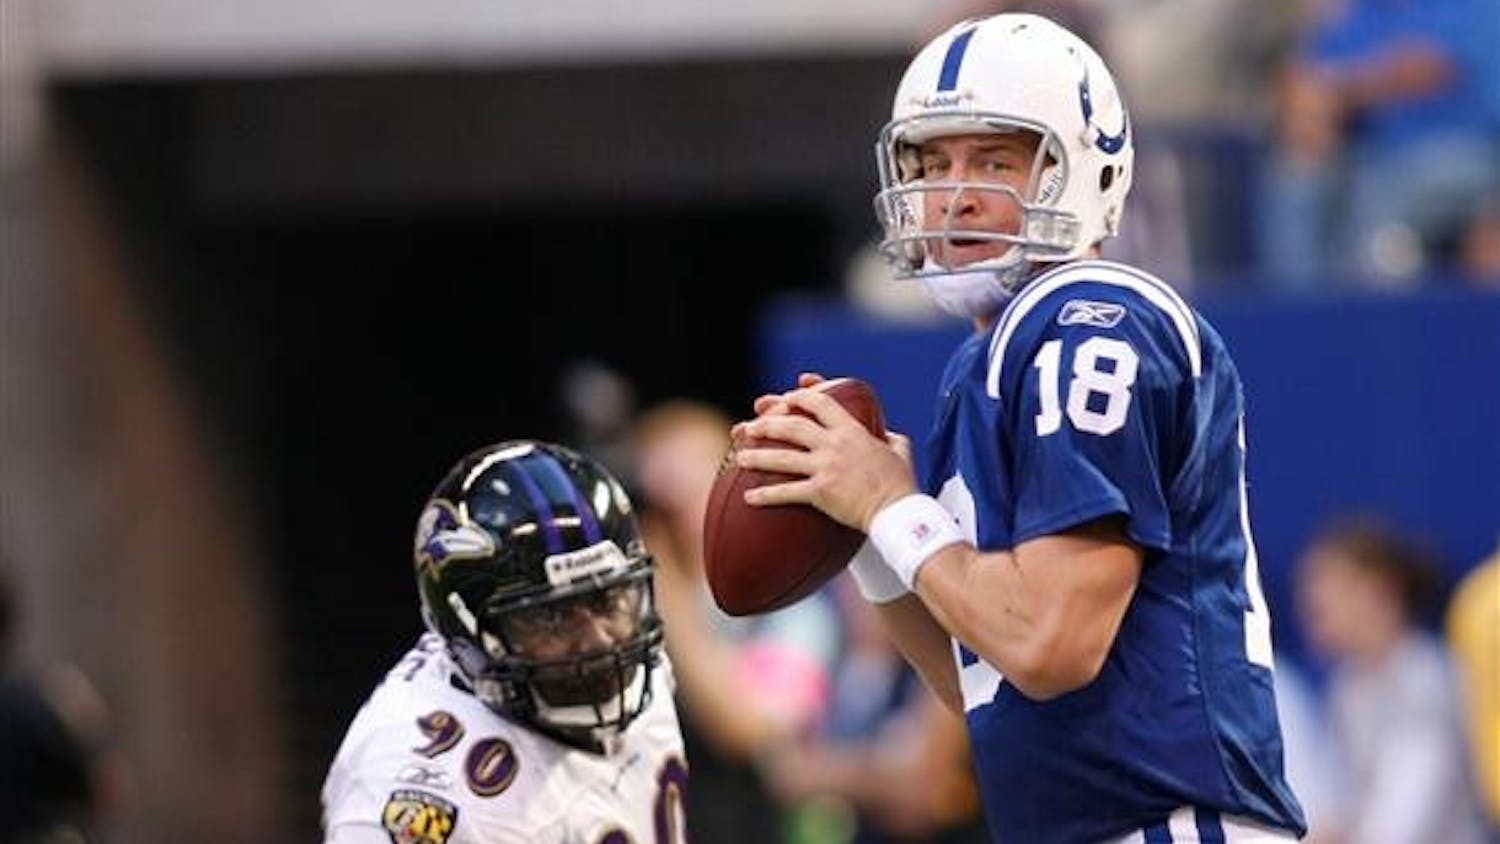 Indianapolis Colts quarterback Peyton Manning gets set to throw in the second half against the Baltimore Ravens in an NFL football game on Sunday in Indianapolis. Indianapolis won 31-3.